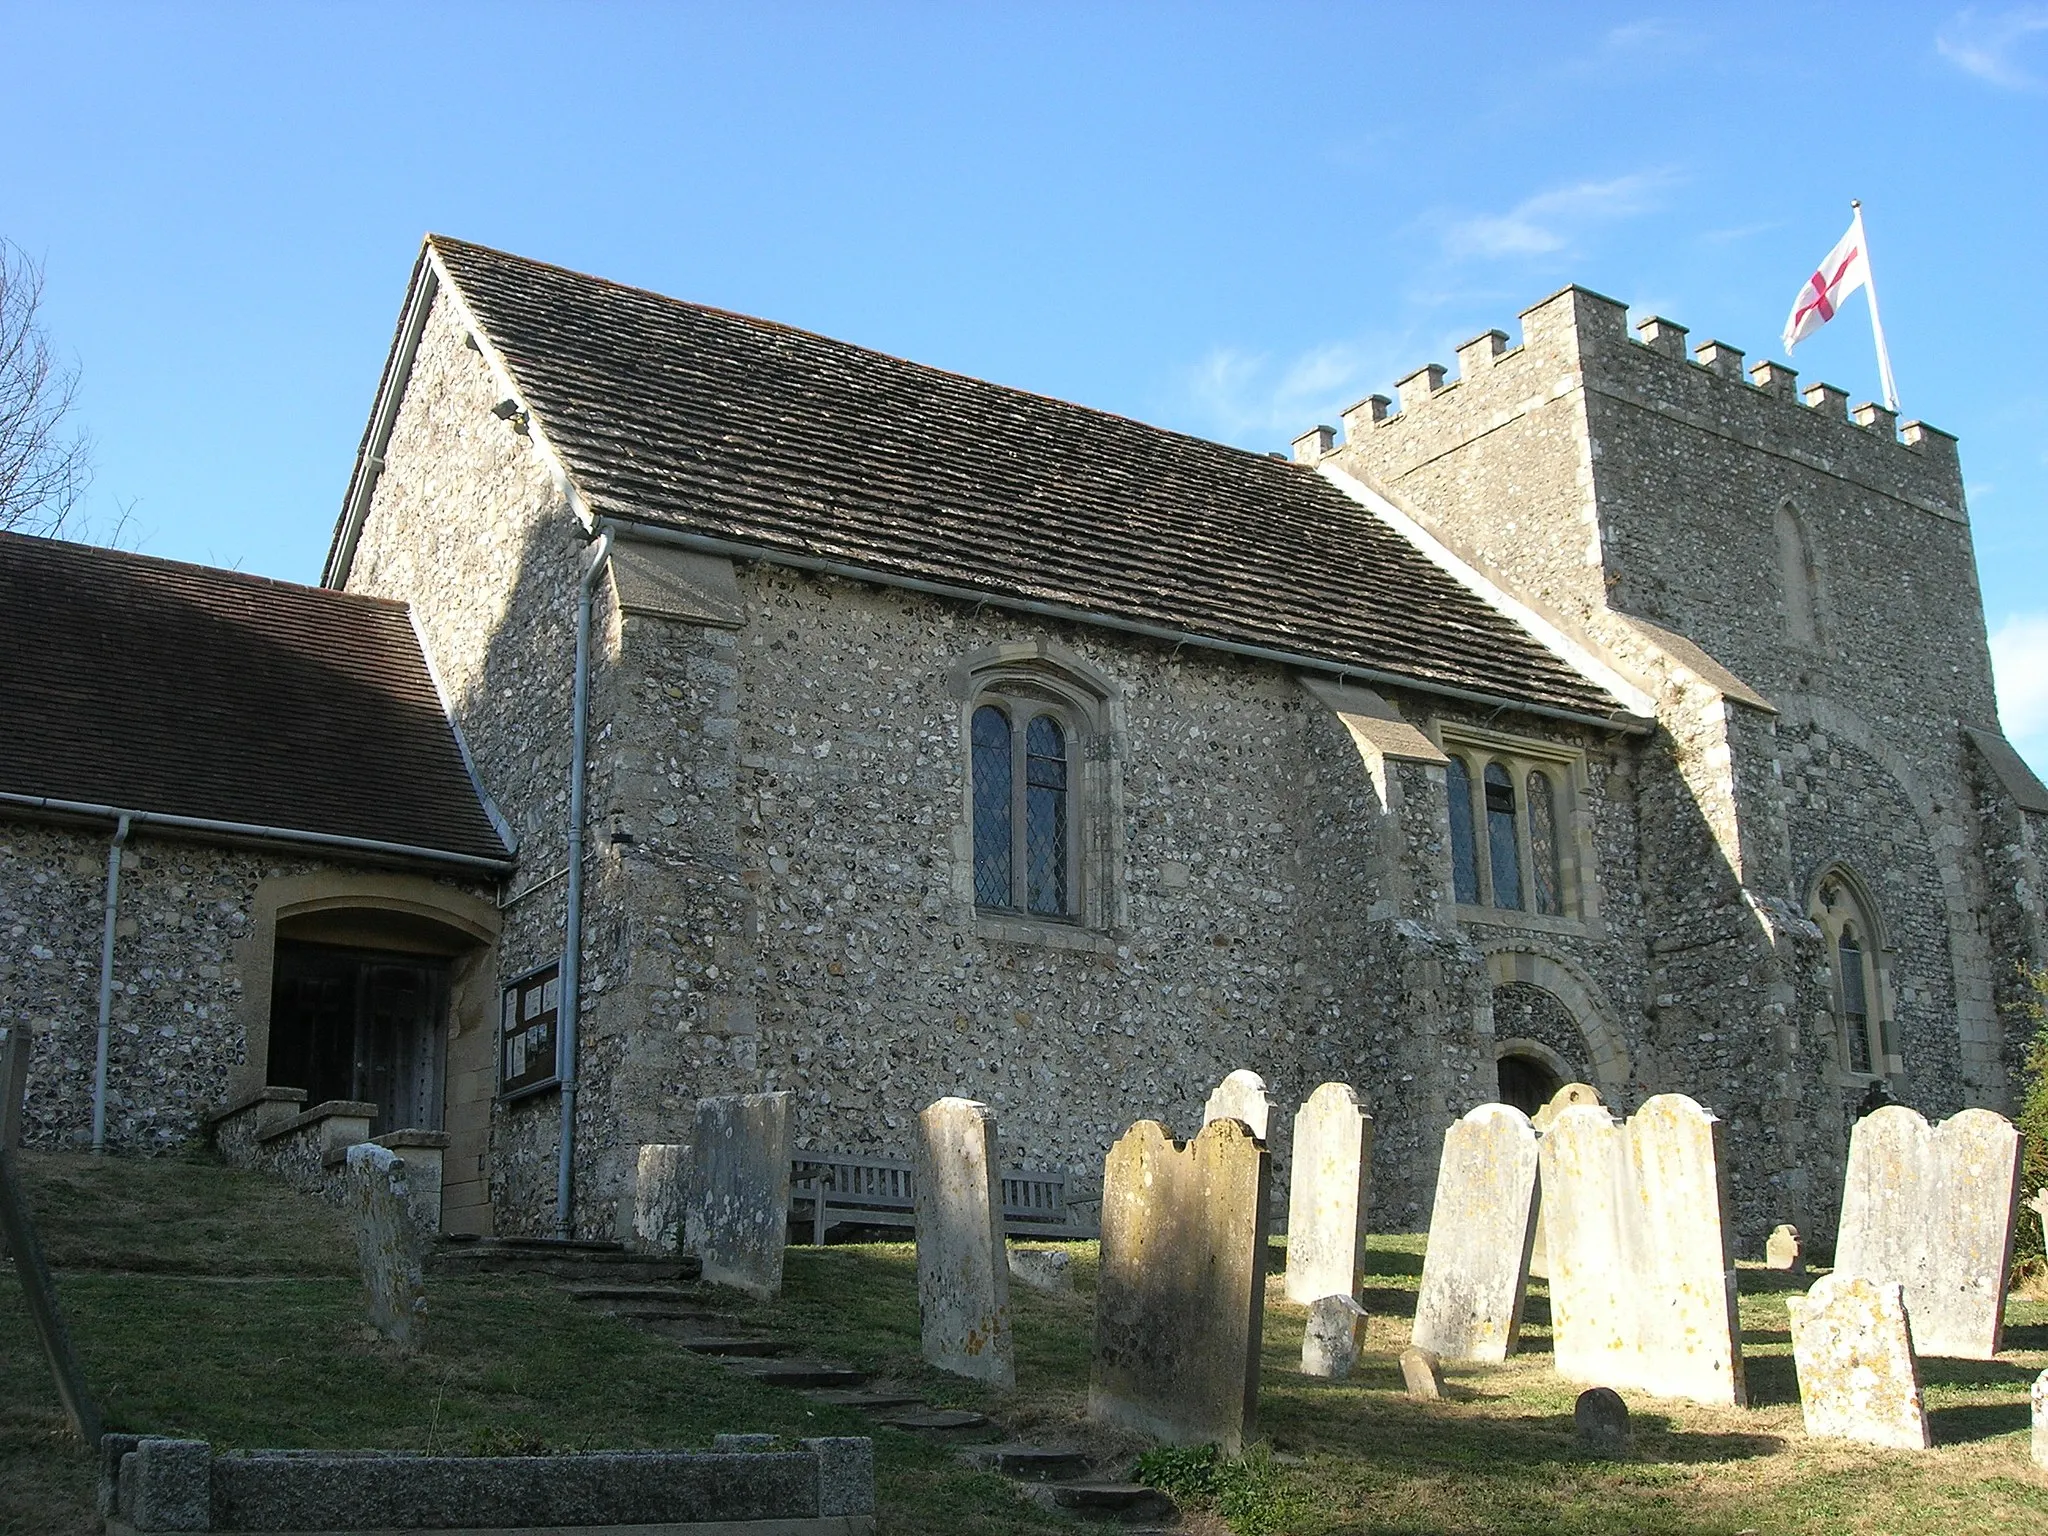 Photo showing: St Nicholas' Church at Bramber Castle, West Sussex, England. The photograph was taken in 2006 by Timothy L'Estrange.